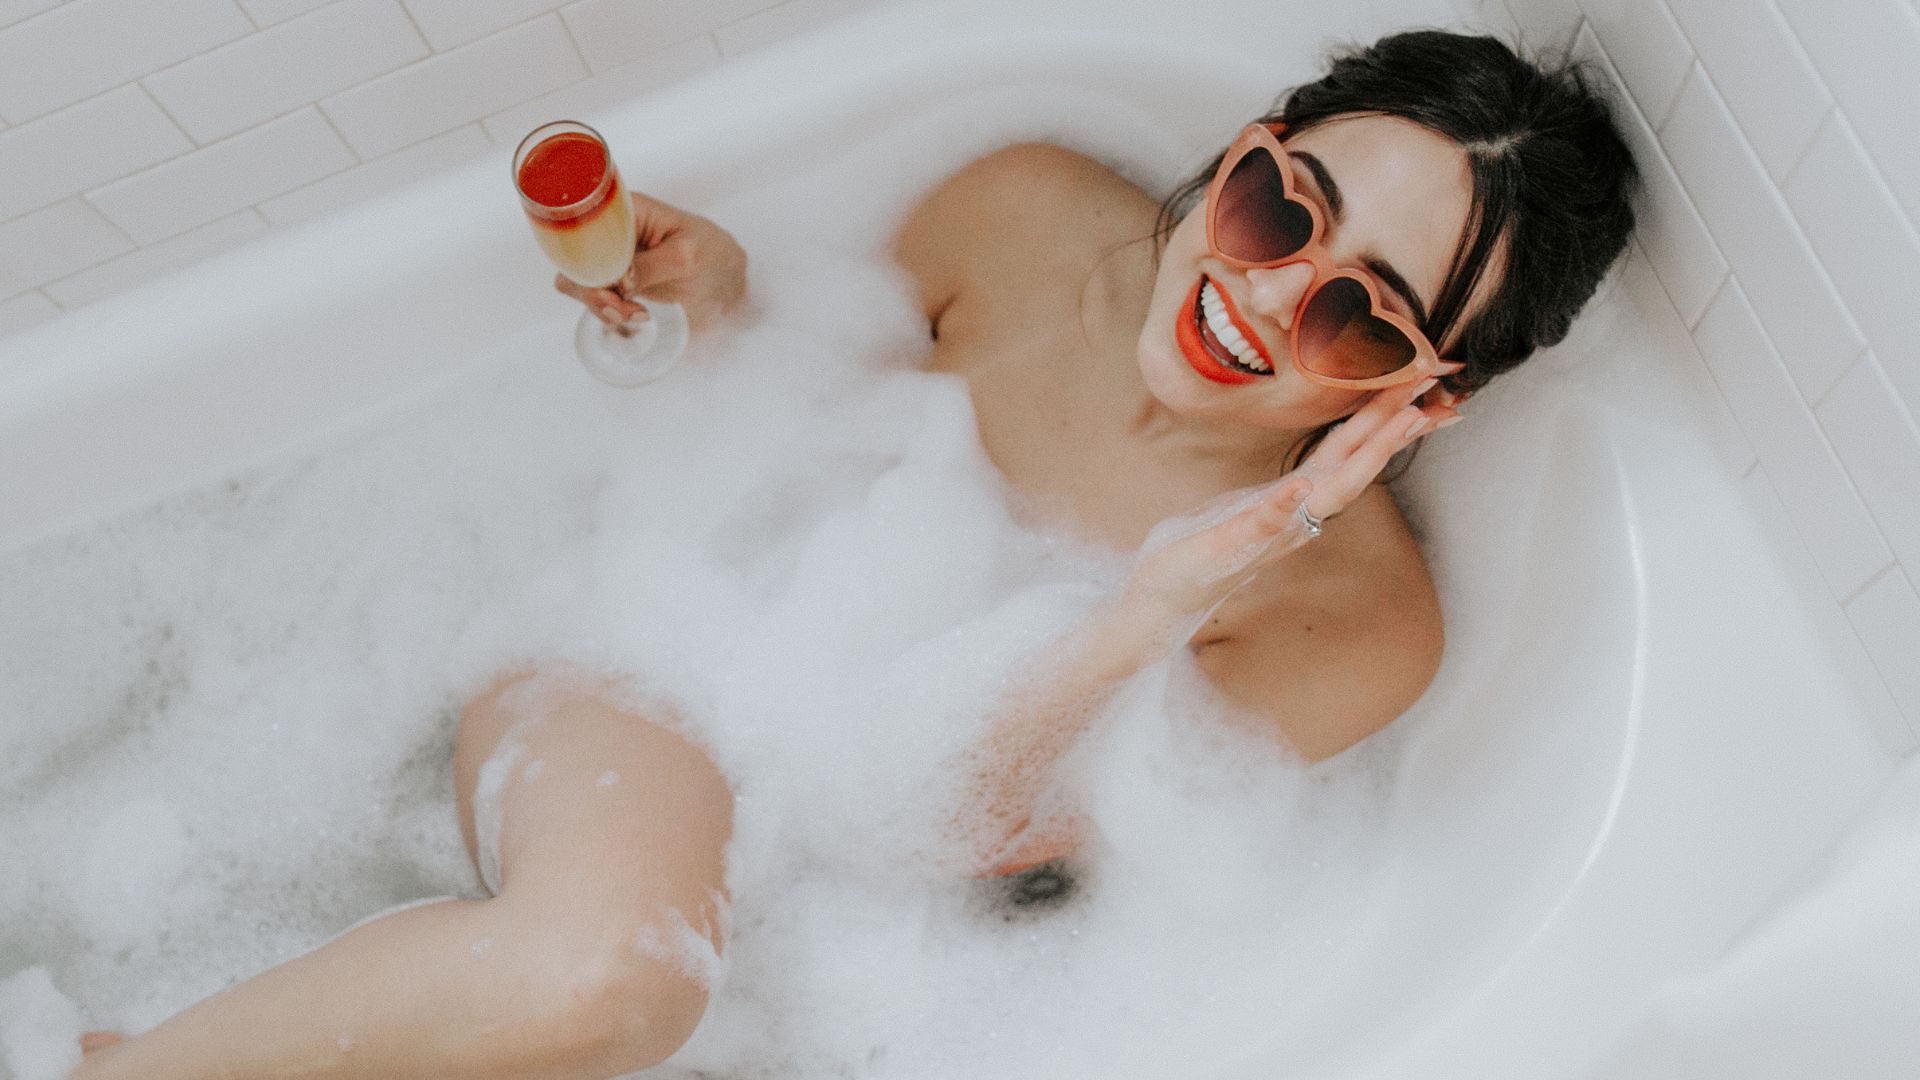 A Woman In A Bathtub With A Drink And A Man In A Mask